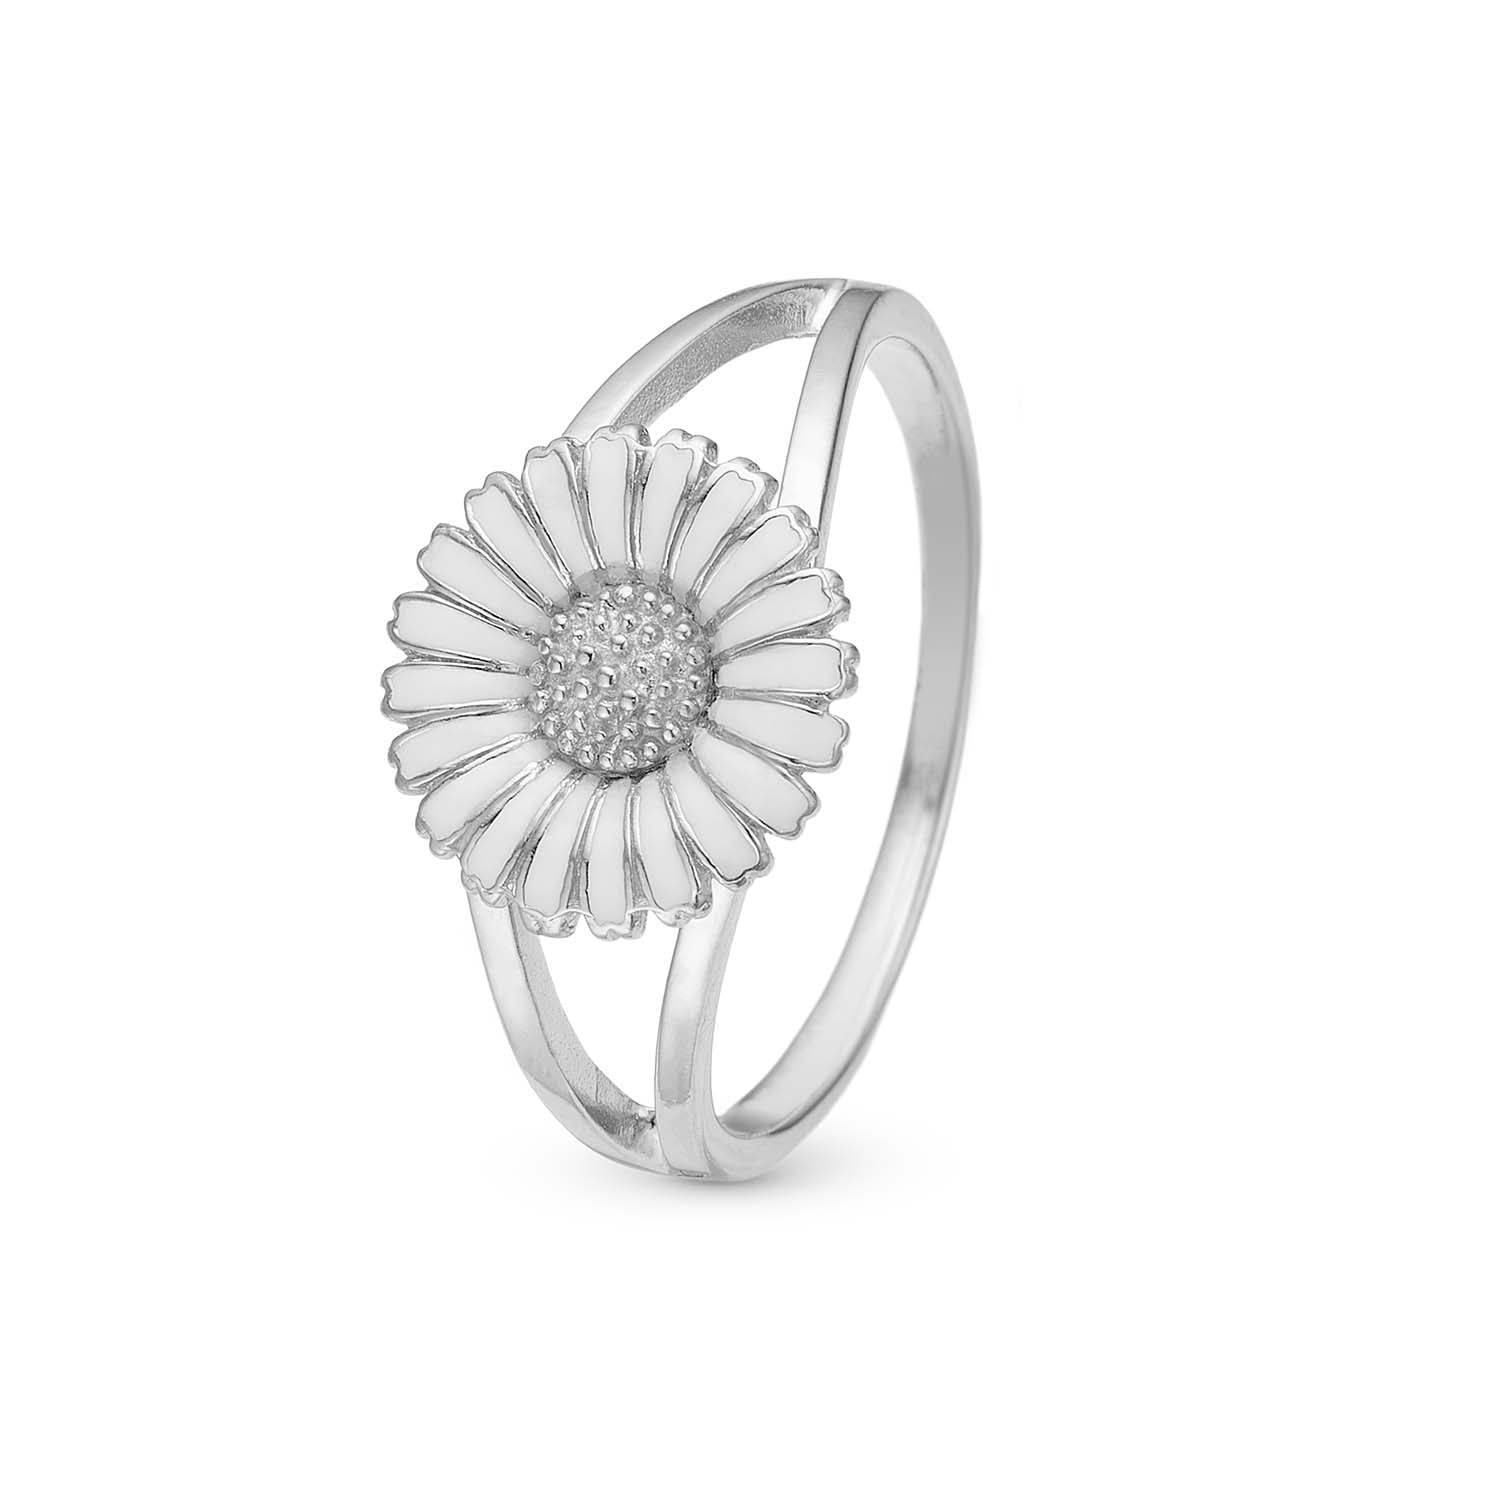 Christina Design London Jewelry & Watches - Marguerit ring Sterlingsølv